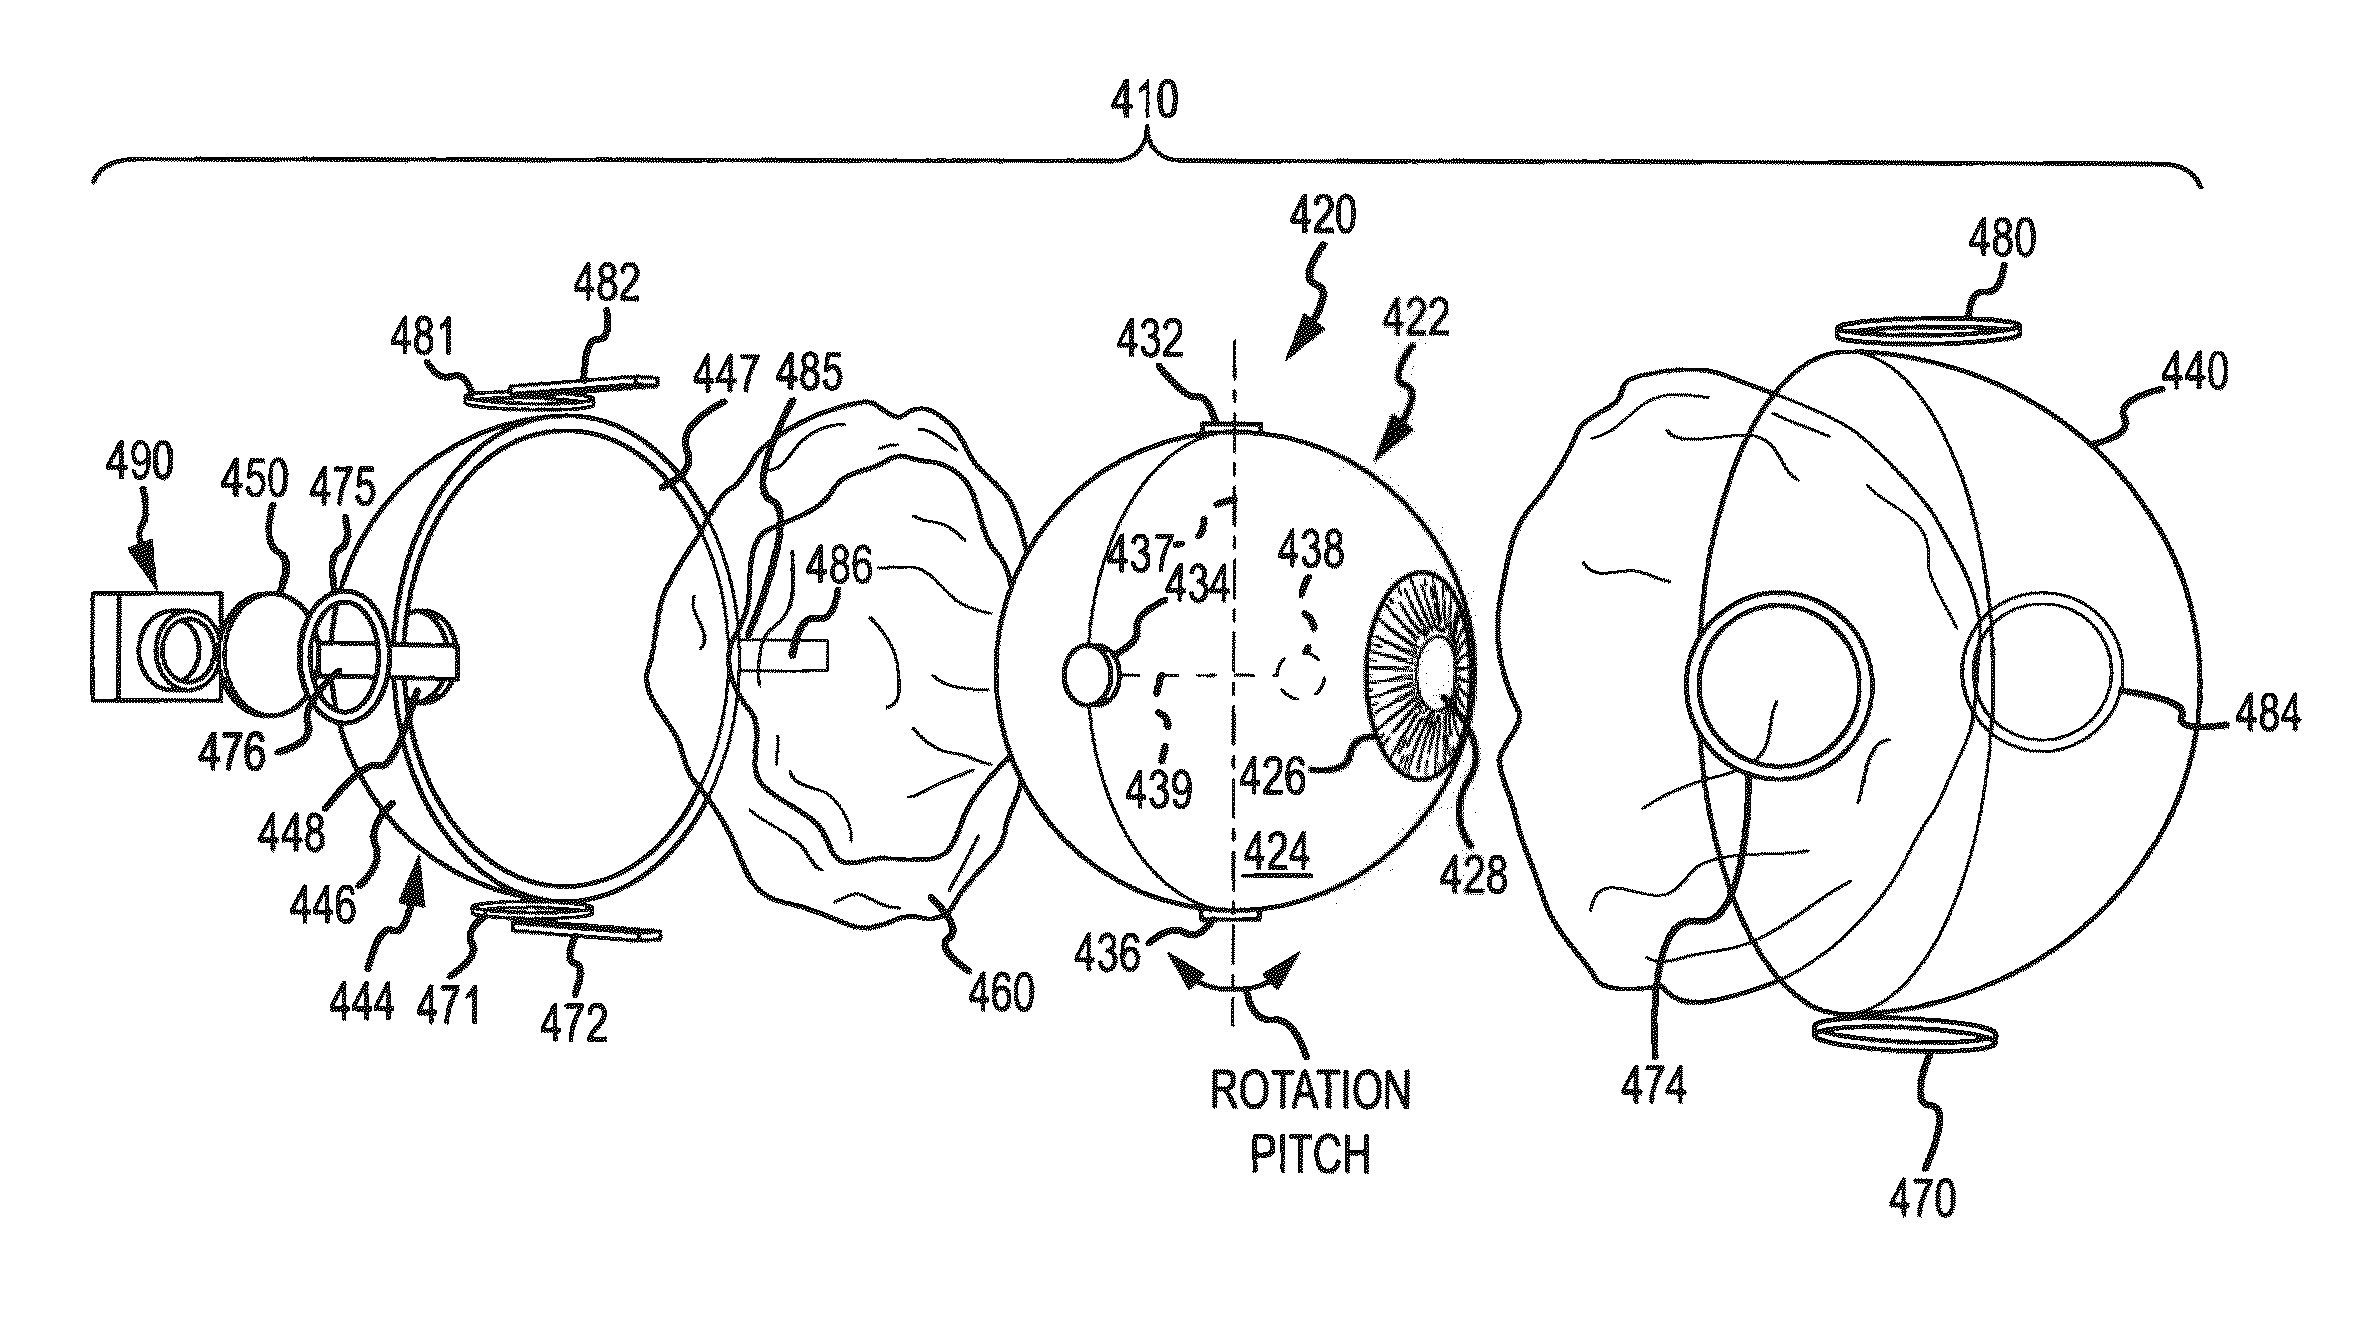 Animatronic eye with an electromagnetic drive and fluid suspension and with video capability